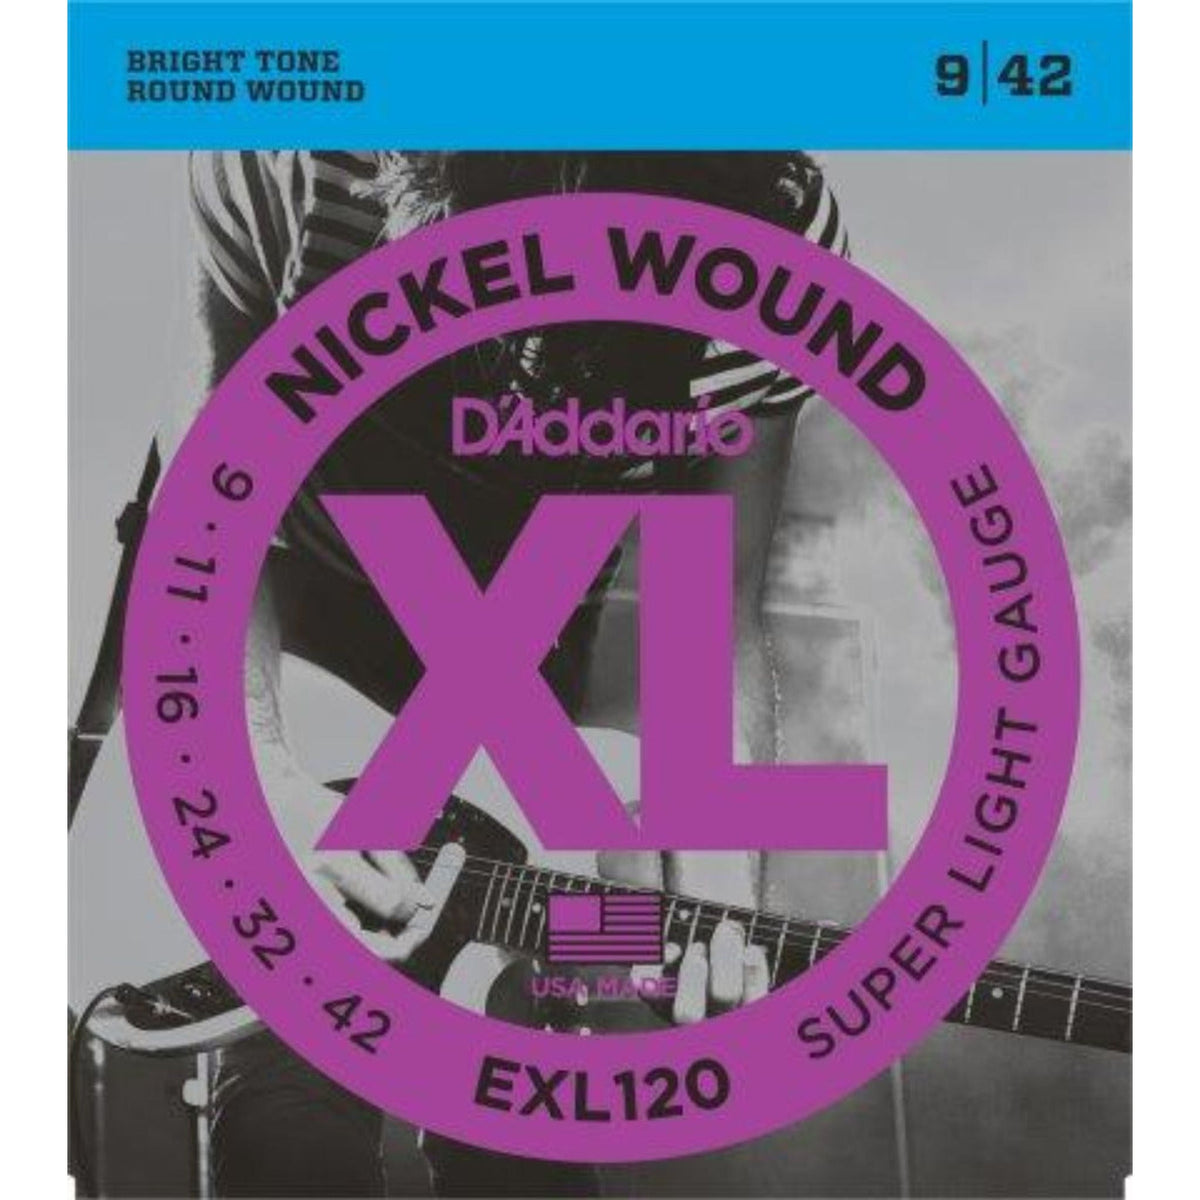 The D&#39;Addario EXL120 Electric Guitar Strings are one of D&#39;Addario&#39;s best selling sets, delivers super flexibility and biting tone. A standard for many electric guitars.